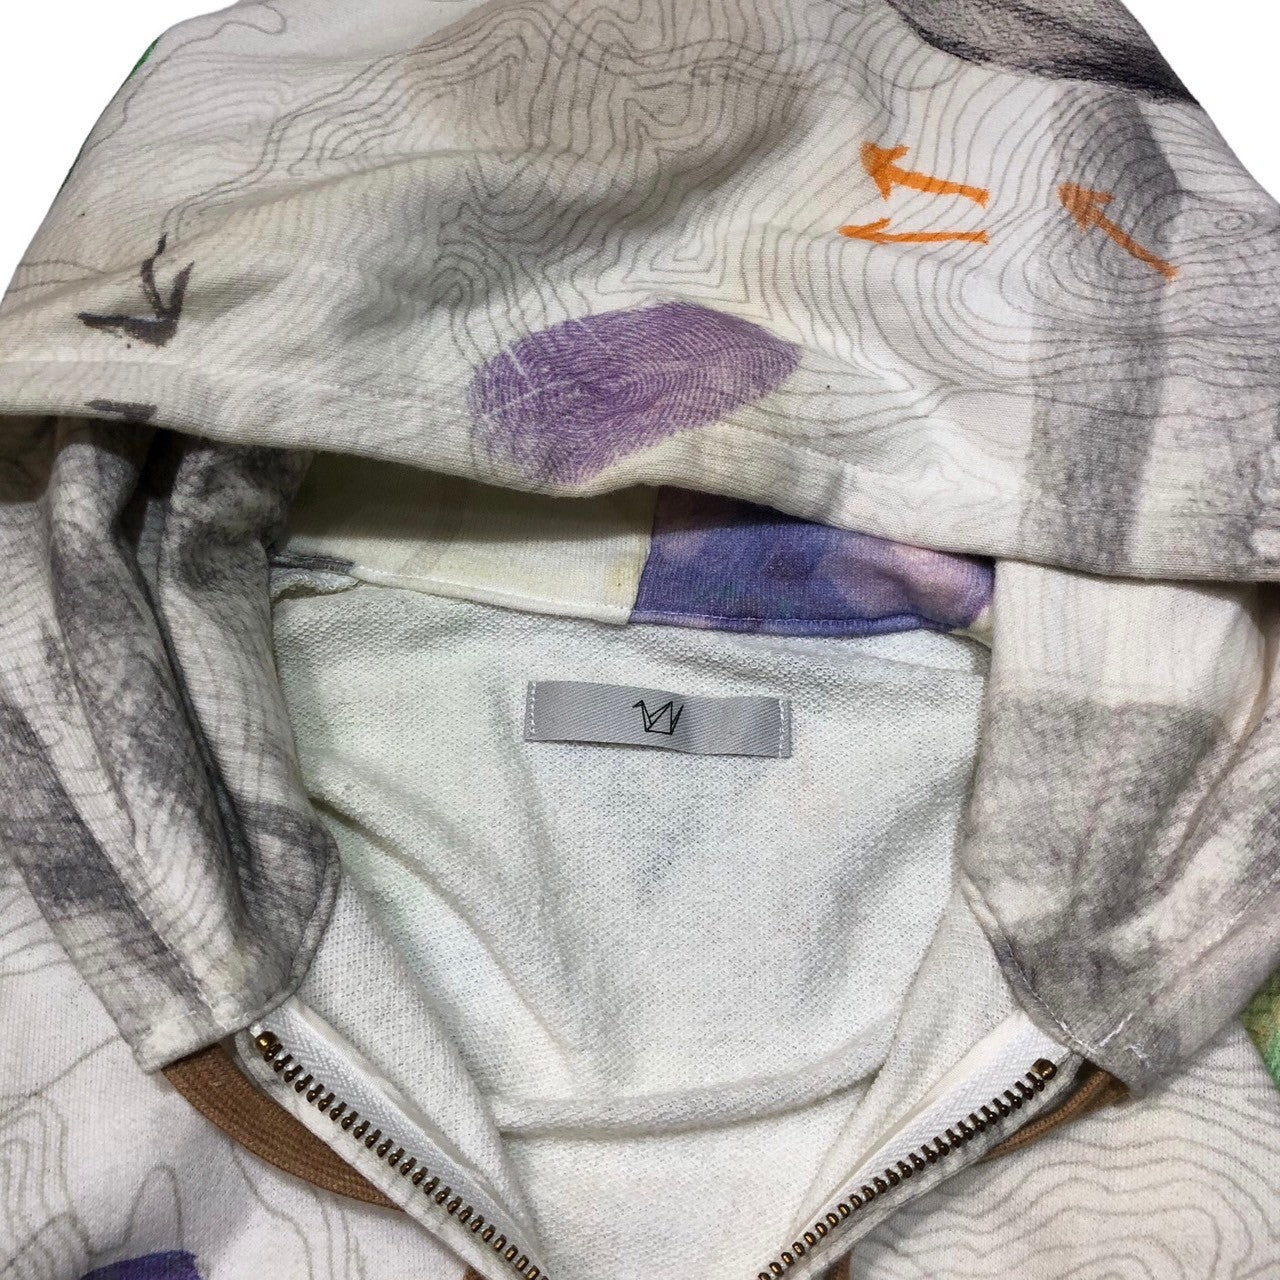 ohta(オオタ) 14SS All-over pattern zip-up hoodie 総柄 ジップアップ パーカー 14SS-JM-03P SIZE S マルチカラー